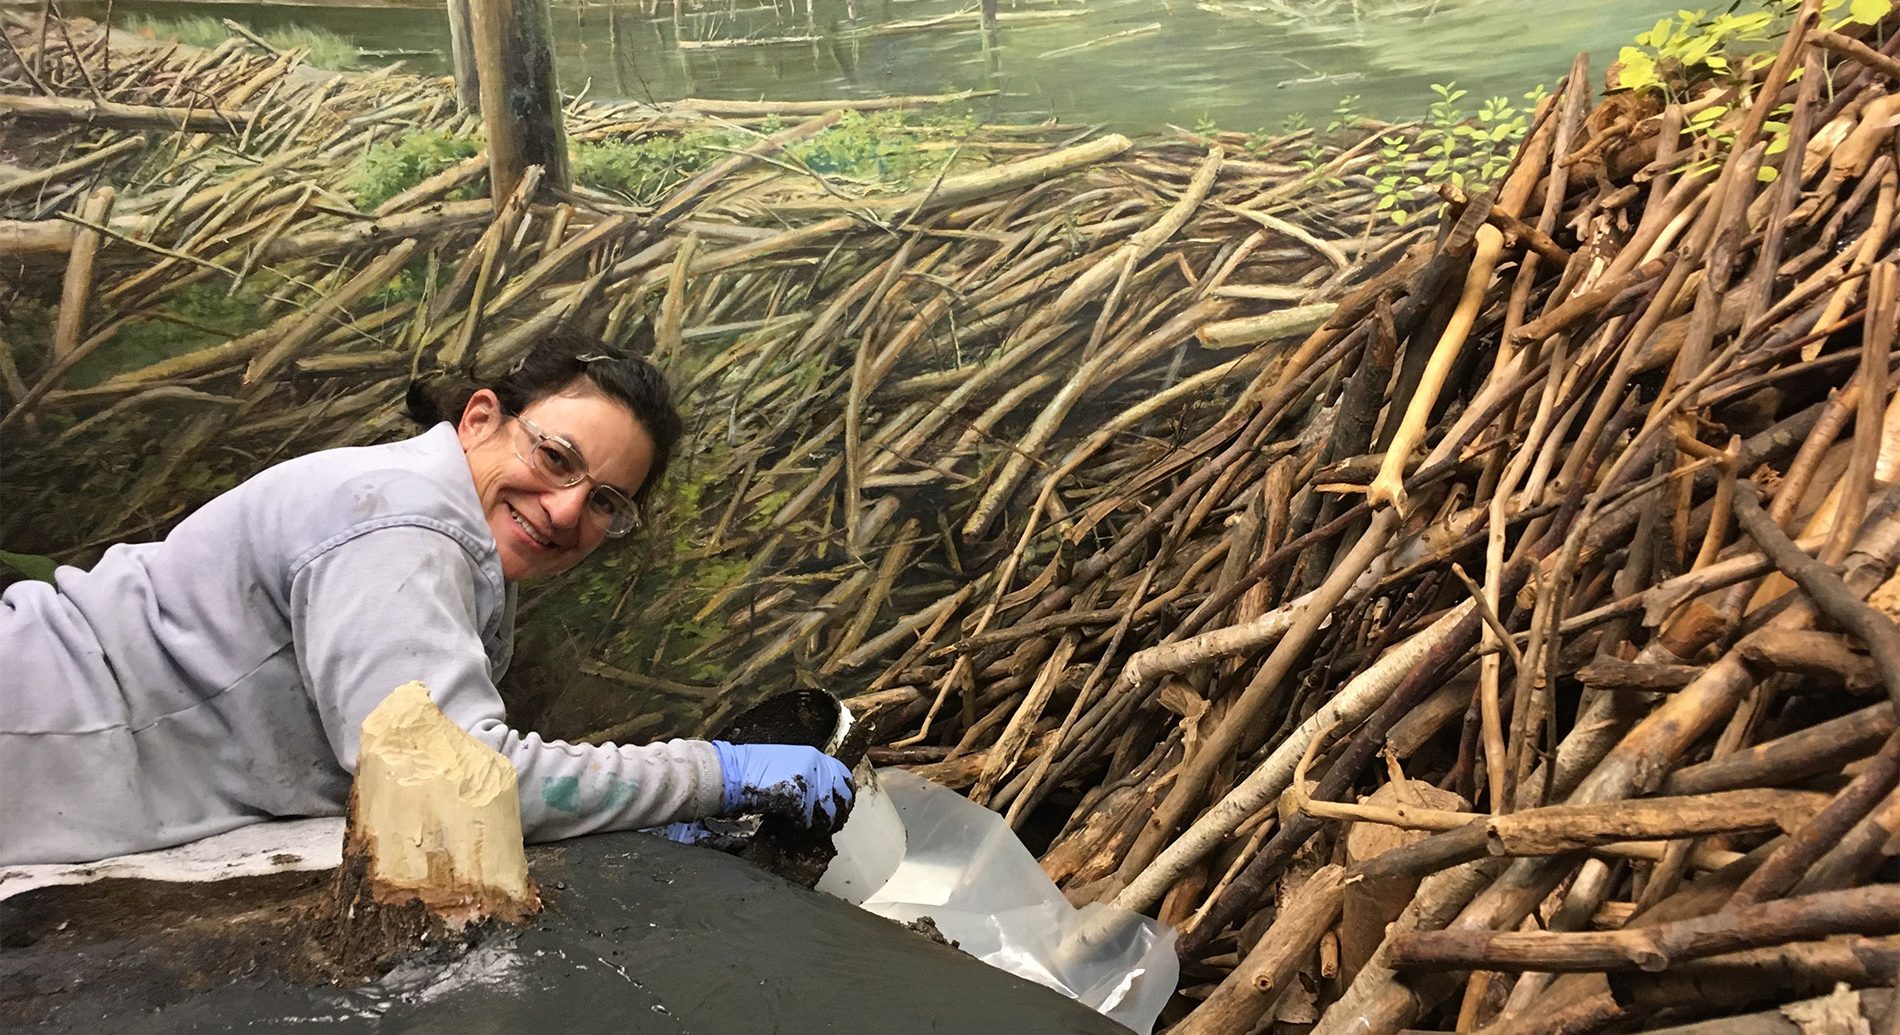 Bell member, Nancy Steifeld works on the beaver diorama restoration, prepping the foreground pieces.